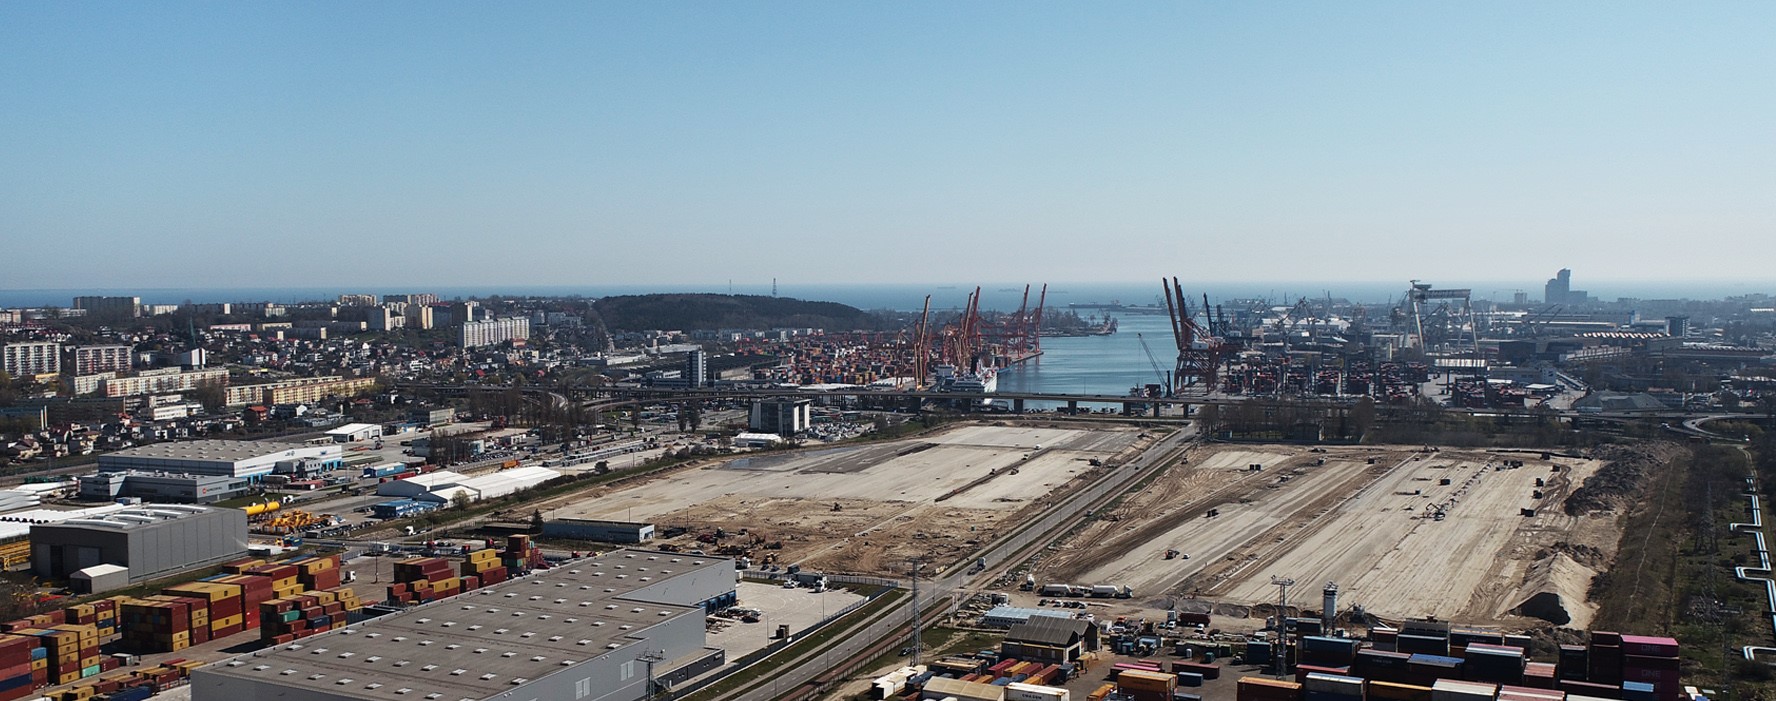 A photo of the Port of Gdynia in Poland